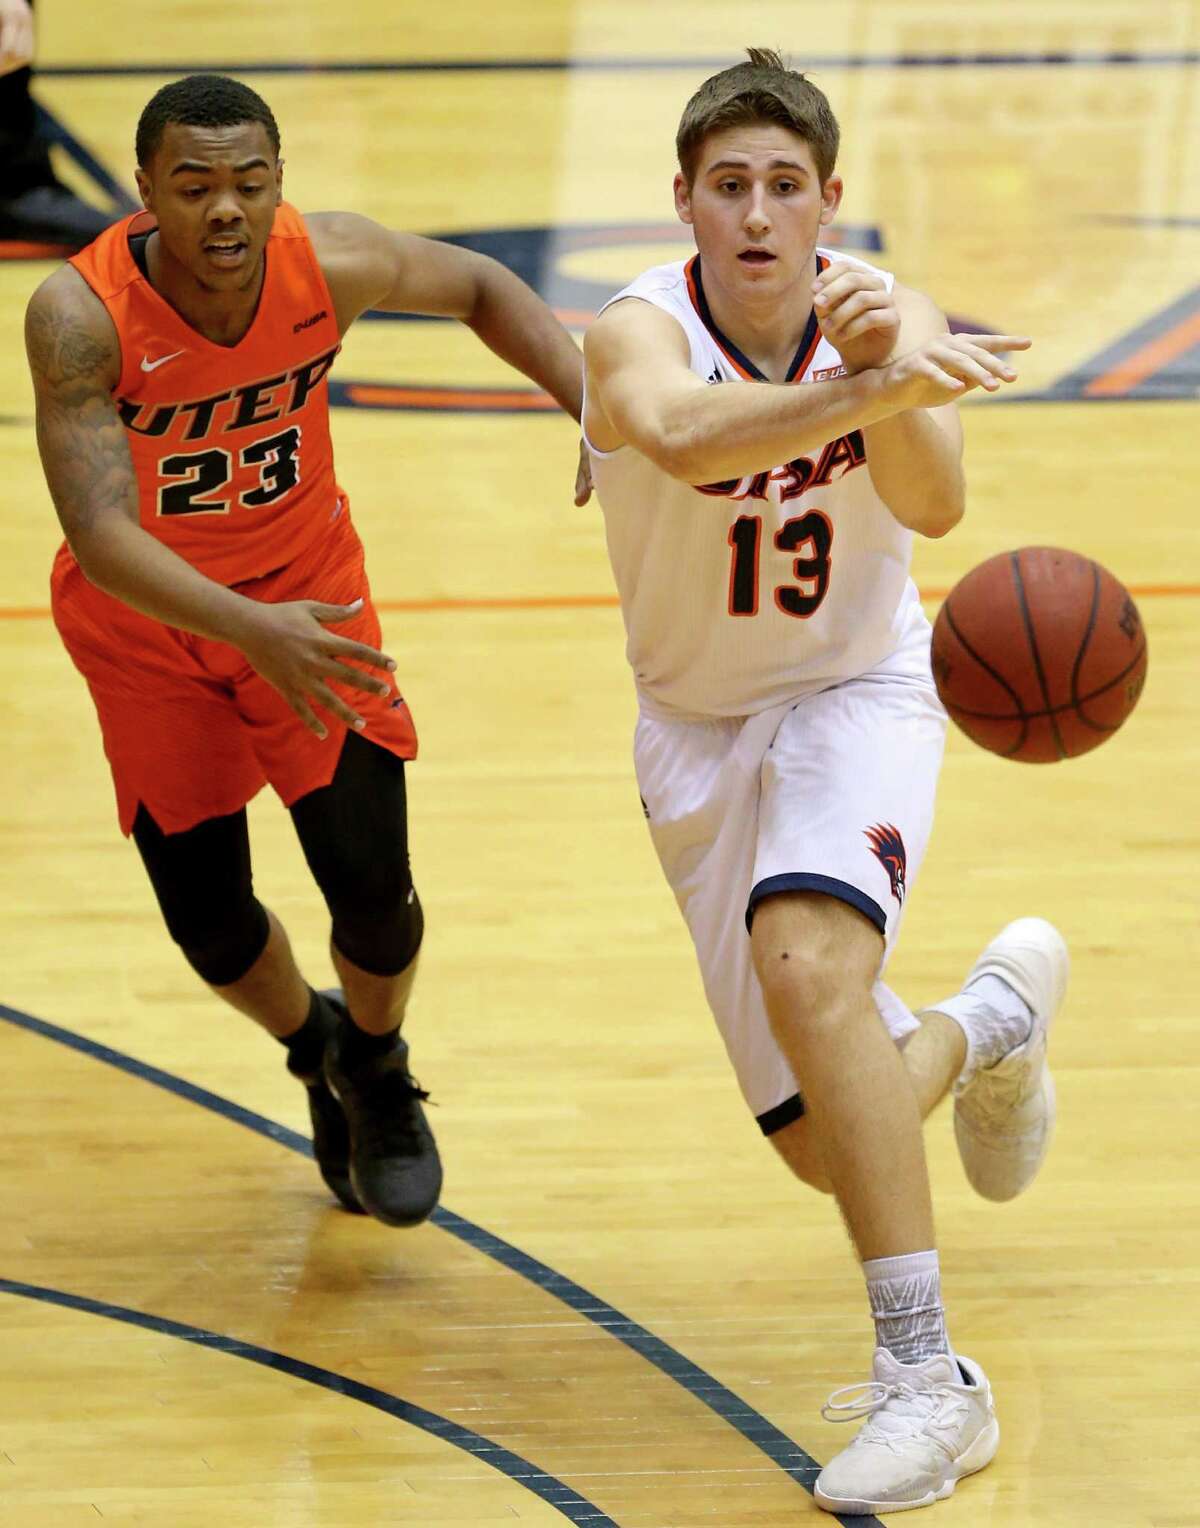 UTSA's Byron Frohnen passes around UTEP's Deon Barrett during first half action Sunday Jan. 1, 2017 at the Convocation Center.